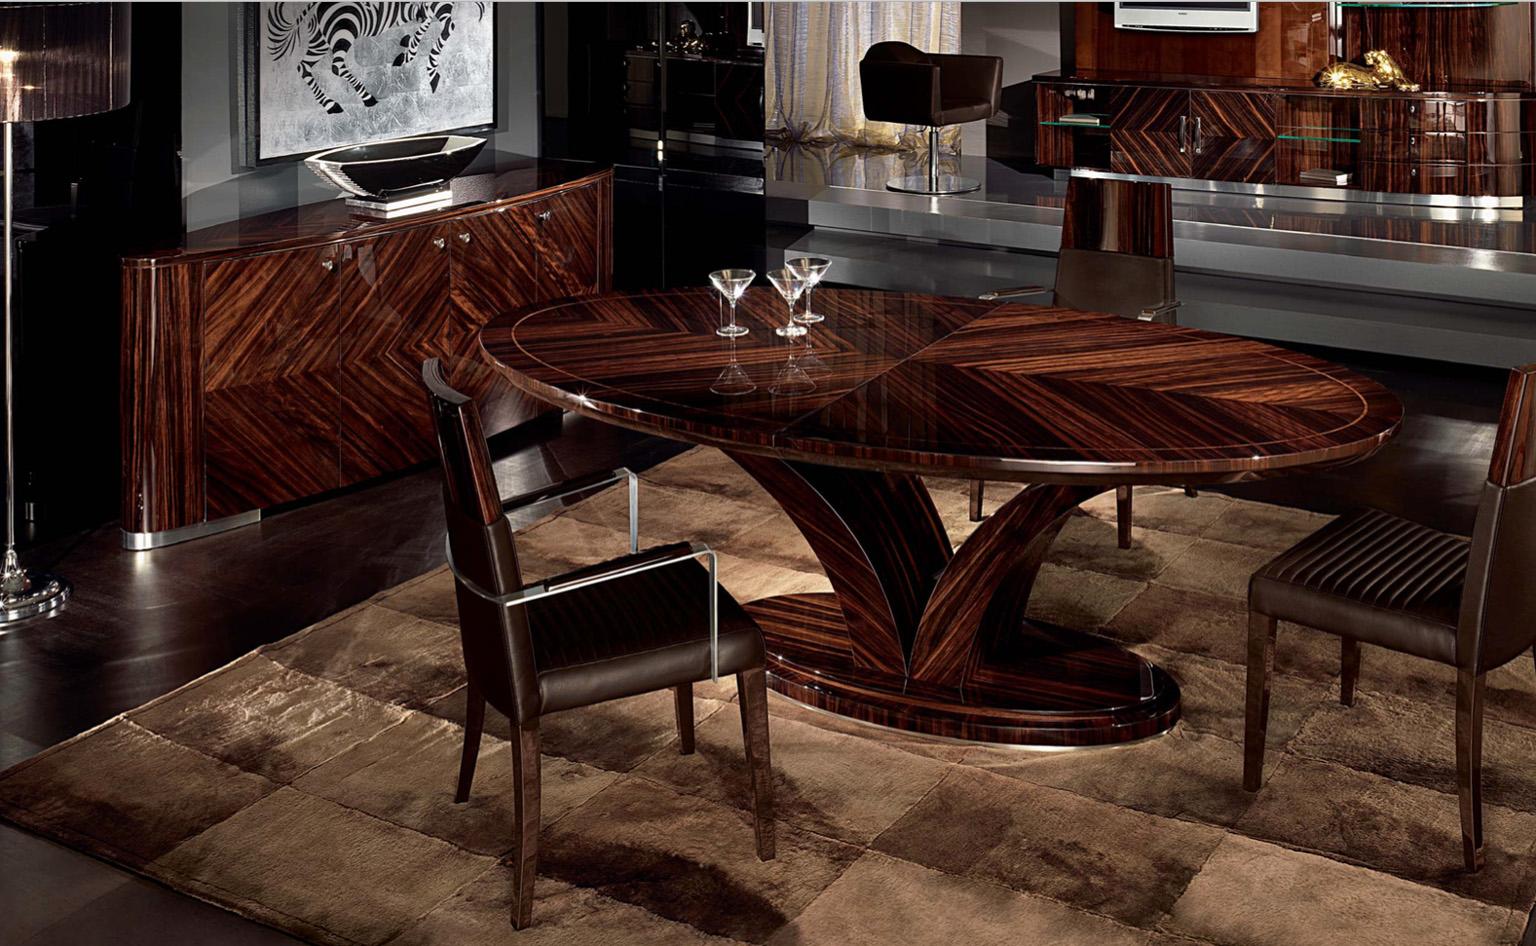 Oval dining table with one center leaf of cm 50 (19” ½), inlay top in Ebony Makassar with 6mm filet in Zebra veneer in high gloss polyester. Brushed and chrome stainless steel details.

Size: 86”½ W x 47”D x 30”H (closed)
Size: 106”½ W x 47”D x 30”H